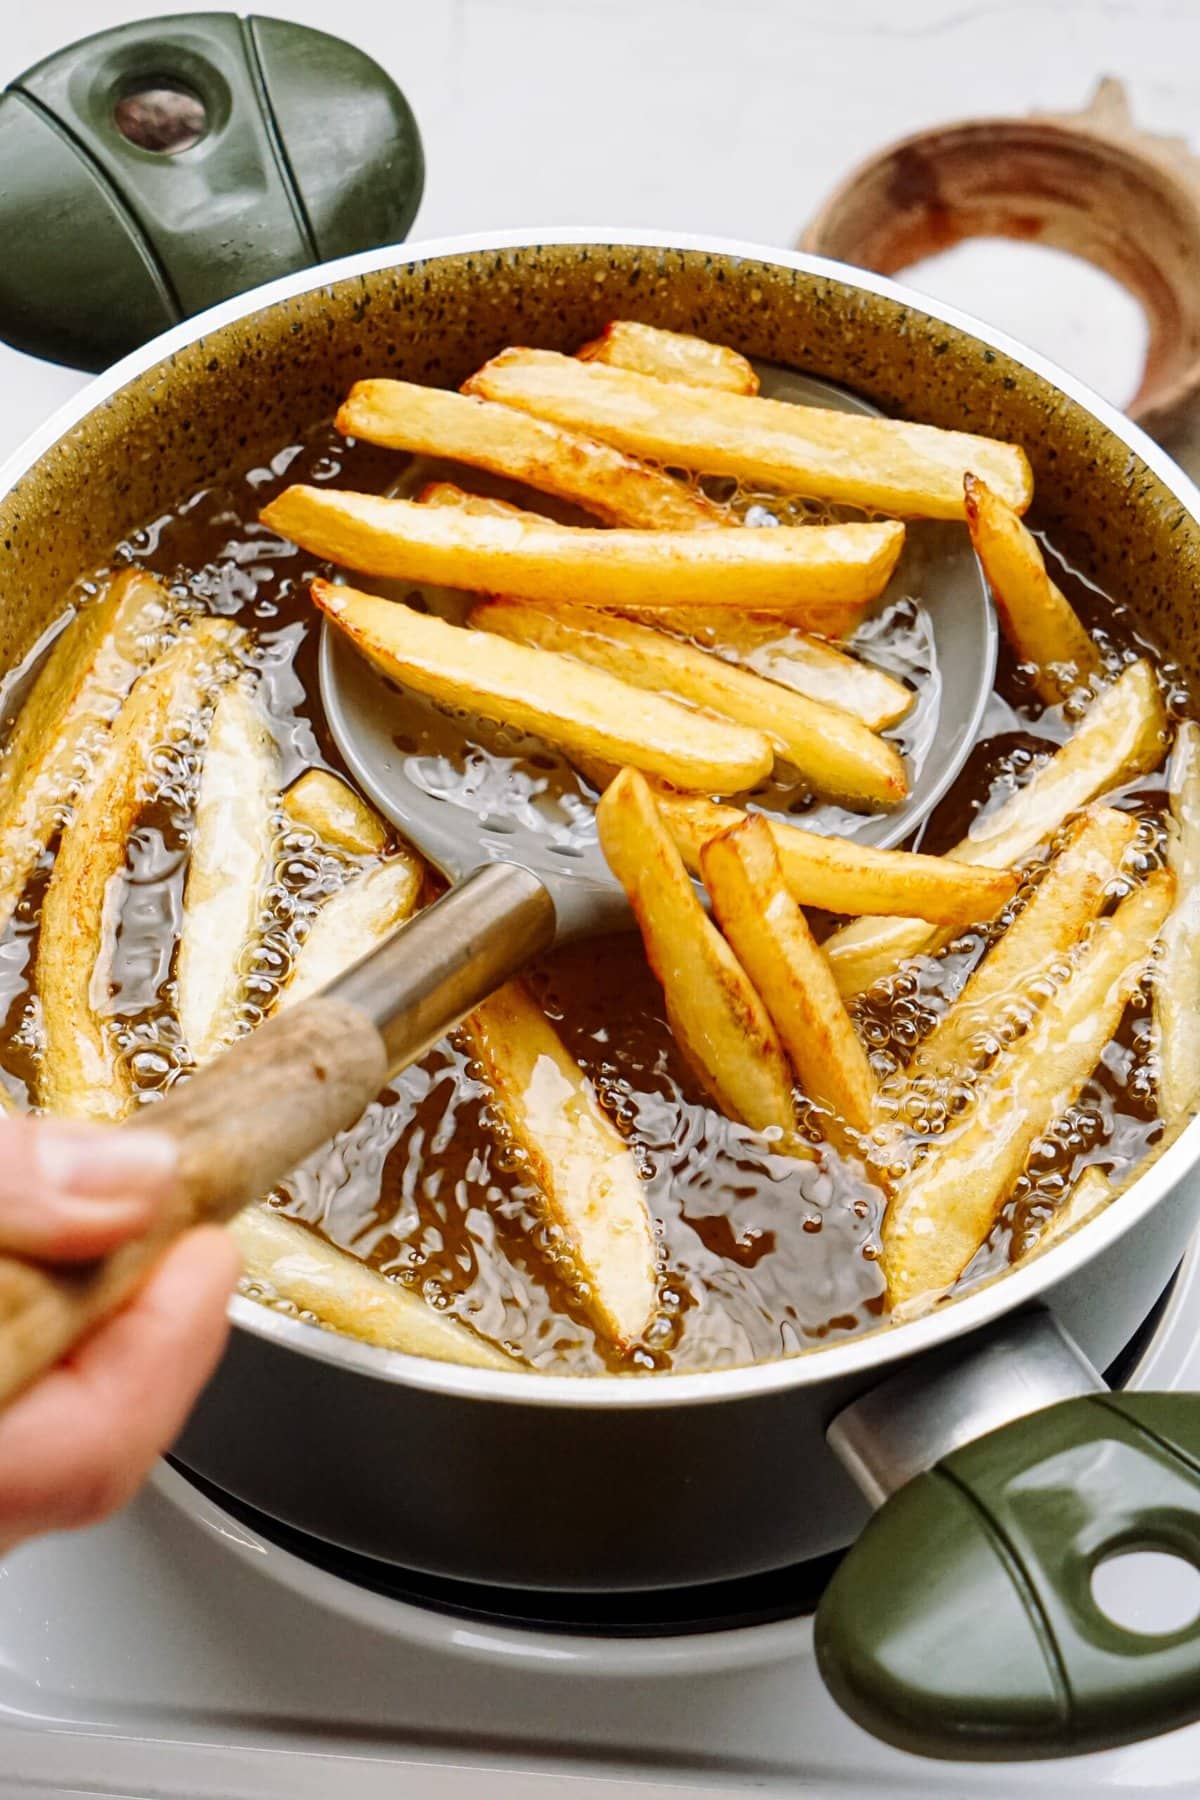 frites being removed from hot oil on a slotted spatula